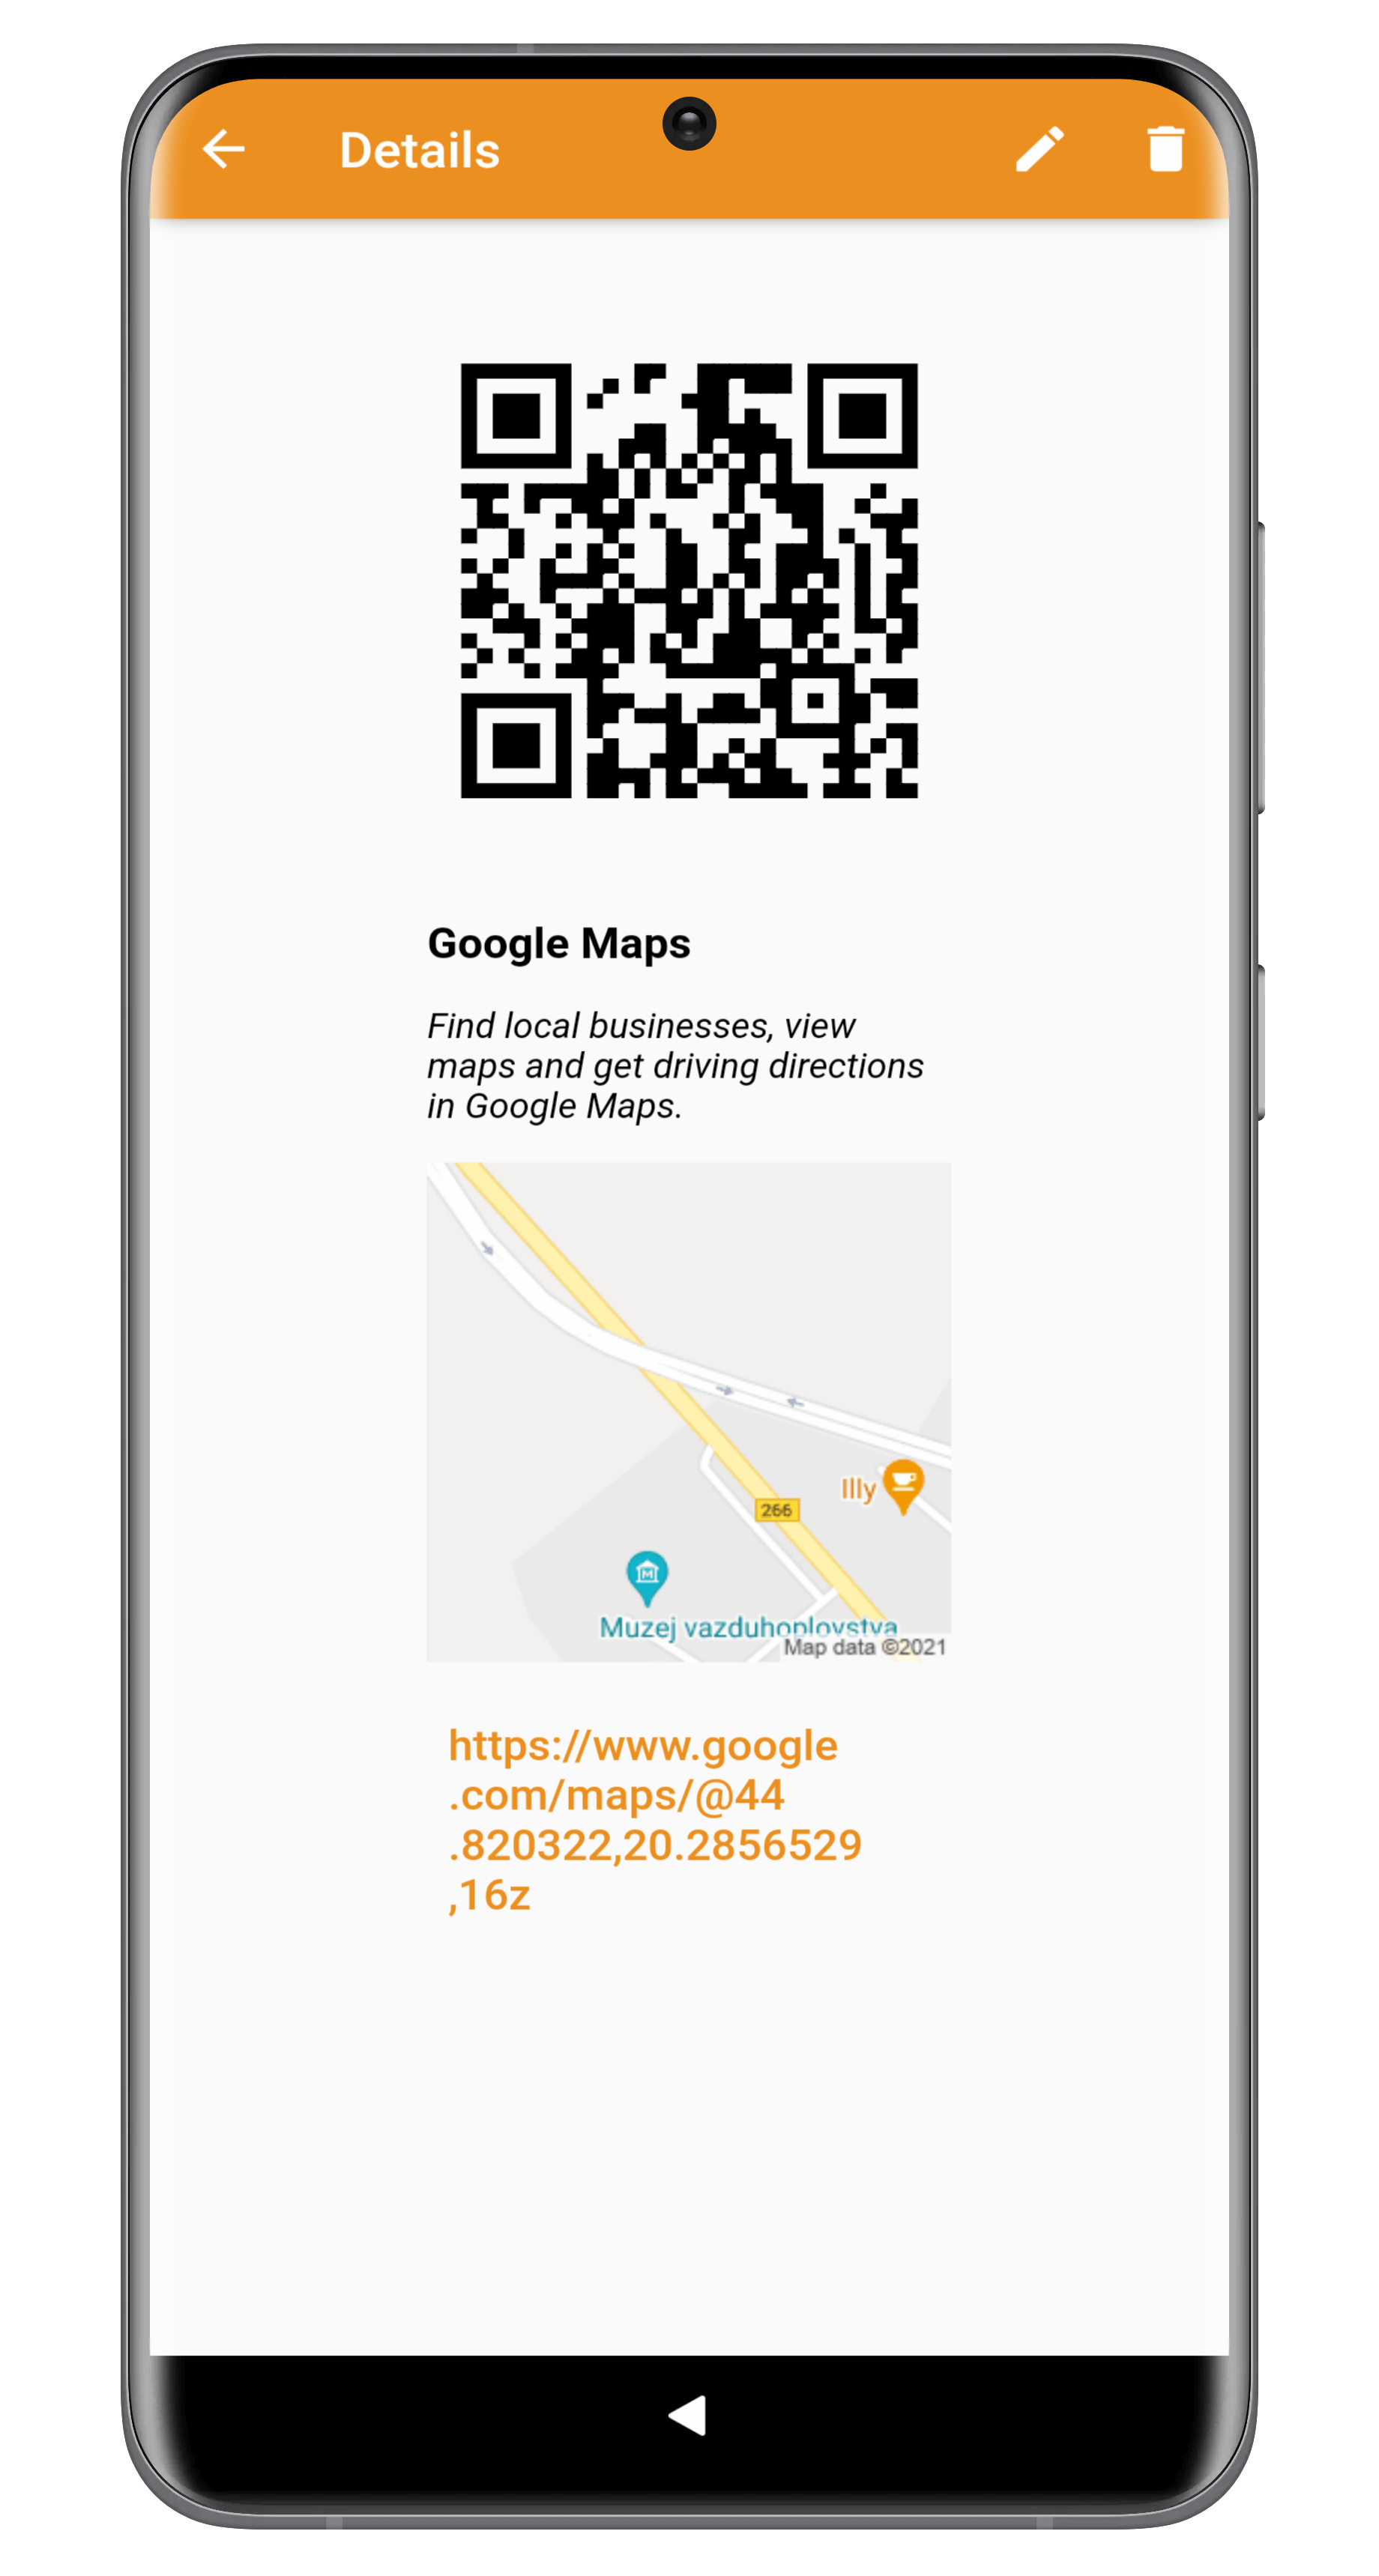 Linkaya Google maps share link preview screen with QR code